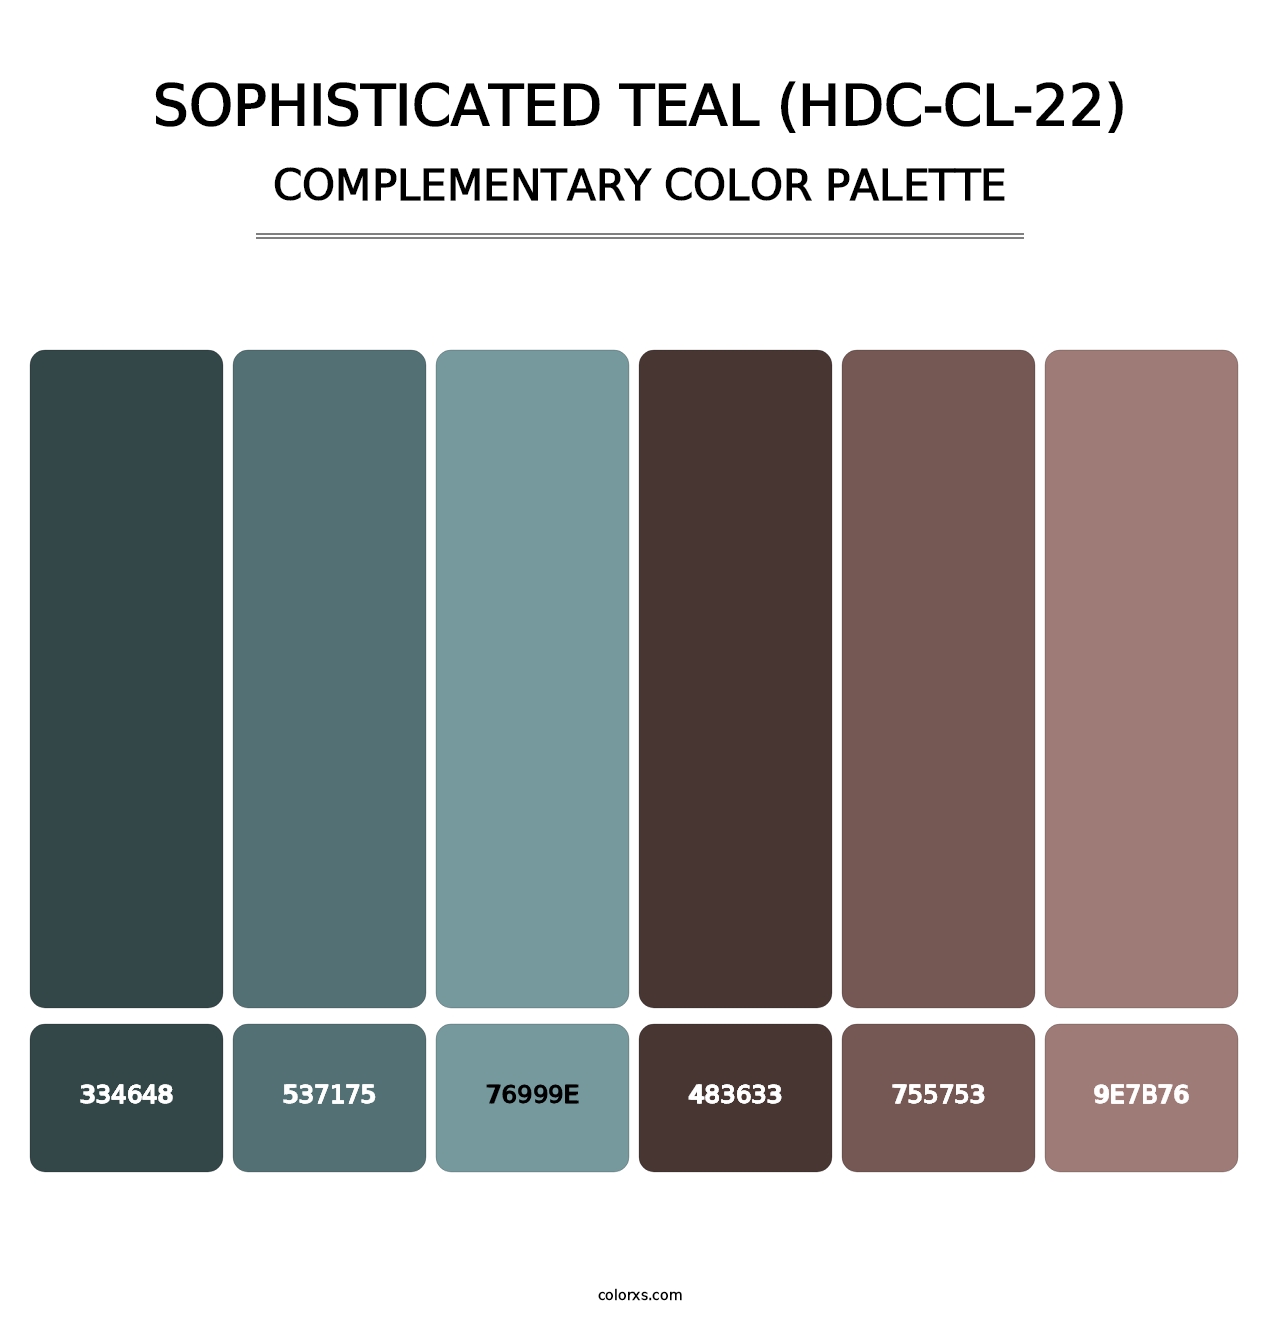 Sophisticated Teal (HDC-CL-22) - Complementary Color Palette